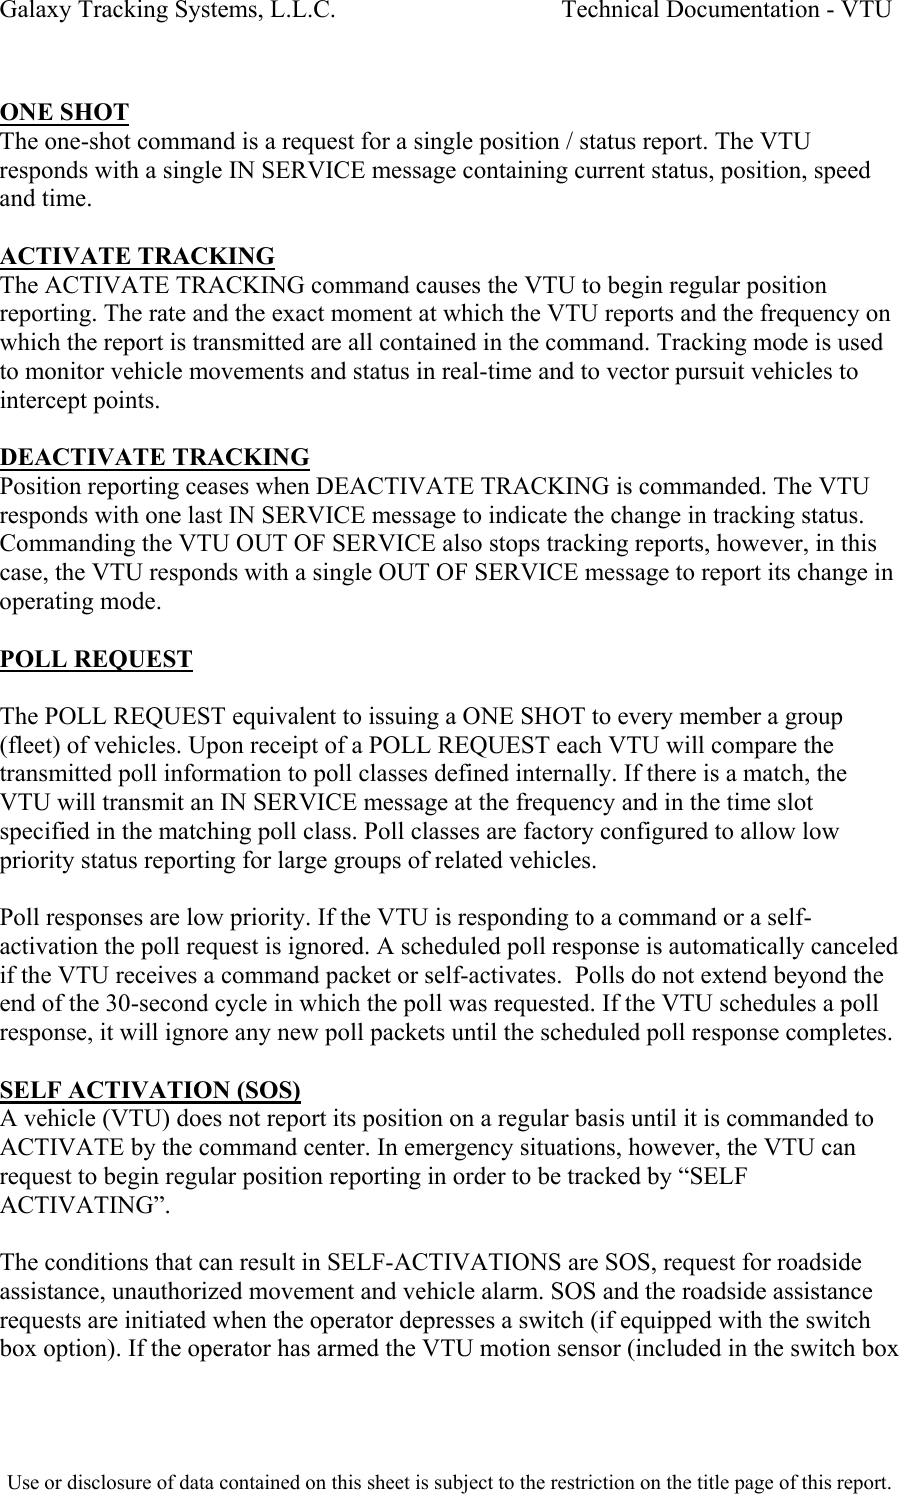 Galaxy Tracking Systems, L.L.C.                                    Technical Documentation - VTU   ONE SHOT The one-shot command is a request for a single position / status report. The VTU responds with a single IN SERVICE message containing current status, position, speed and time.  ACTIVATE TRACKING The ACTIVATE TRACKING command causes the VTU to begin regular position reporting. The rate and the exact moment at which the VTU reports and the frequency on which the report is transmitted are all contained in the command. Tracking mode is used to monitor vehicle movements and status in real-time and to vector pursuit vehicles to intercept points.  DEACTIVATE TRACKING Position reporting ceases when DEACTIVATE TRACKING is commanded. The VTU responds with one last IN SERVICE message to indicate the change in tracking status. Commanding the VTU OUT OF SERVICE also stops tracking reports, however, in this case, the VTU responds with a single OUT OF SERVICE message to report its change in operating mode.  POLL REQUEST  The POLL REQUEST equivalent to issuing a ONE SHOT to every member a group (fleet) of vehicles. Upon receipt of a POLL REQUEST each VTU will compare the transmitted poll information to poll classes defined internally. If there is a match, the VTU will transmit an IN SERVICE message at the frequency and in the time slot specified in the matching poll class. Poll classes are factory configured to allow low priority status reporting for large groups of related vehicles.  Poll responses are low priority. If the VTU is responding to a command or a self-activation the poll request is ignored. A scheduled poll response is automatically canceled if the VTU receives a command packet or self-activates.  Polls do not extend beyond the end of the 30-second cycle in which the poll was requested. If the VTU schedules a poll response, it will ignore any new poll packets until the scheduled poll response completes.   SELF ACTIVATION (SOS) A vehicle (VTU) does not report its position on a regular basis until it is commanded to ACTIVATE by the command center. In emergency situations, however, the VTU can request to begin regular position reporting in order to be tracked by “SELF ACTIVATING”.  The conditions that can result in SELF-ACTIVATIONS are SOS, request for roadside assistance, unauthorized movement and vehicle alarm. SOS and the roadside assistance requests are initiated when the operator depresses a switch (if equipped with the switch box option). If the operator has armed the VTU motion sensor (included in the switch box  Use or disclosure of data contained on this sheet is subject to the restriction on the title page of this report.  